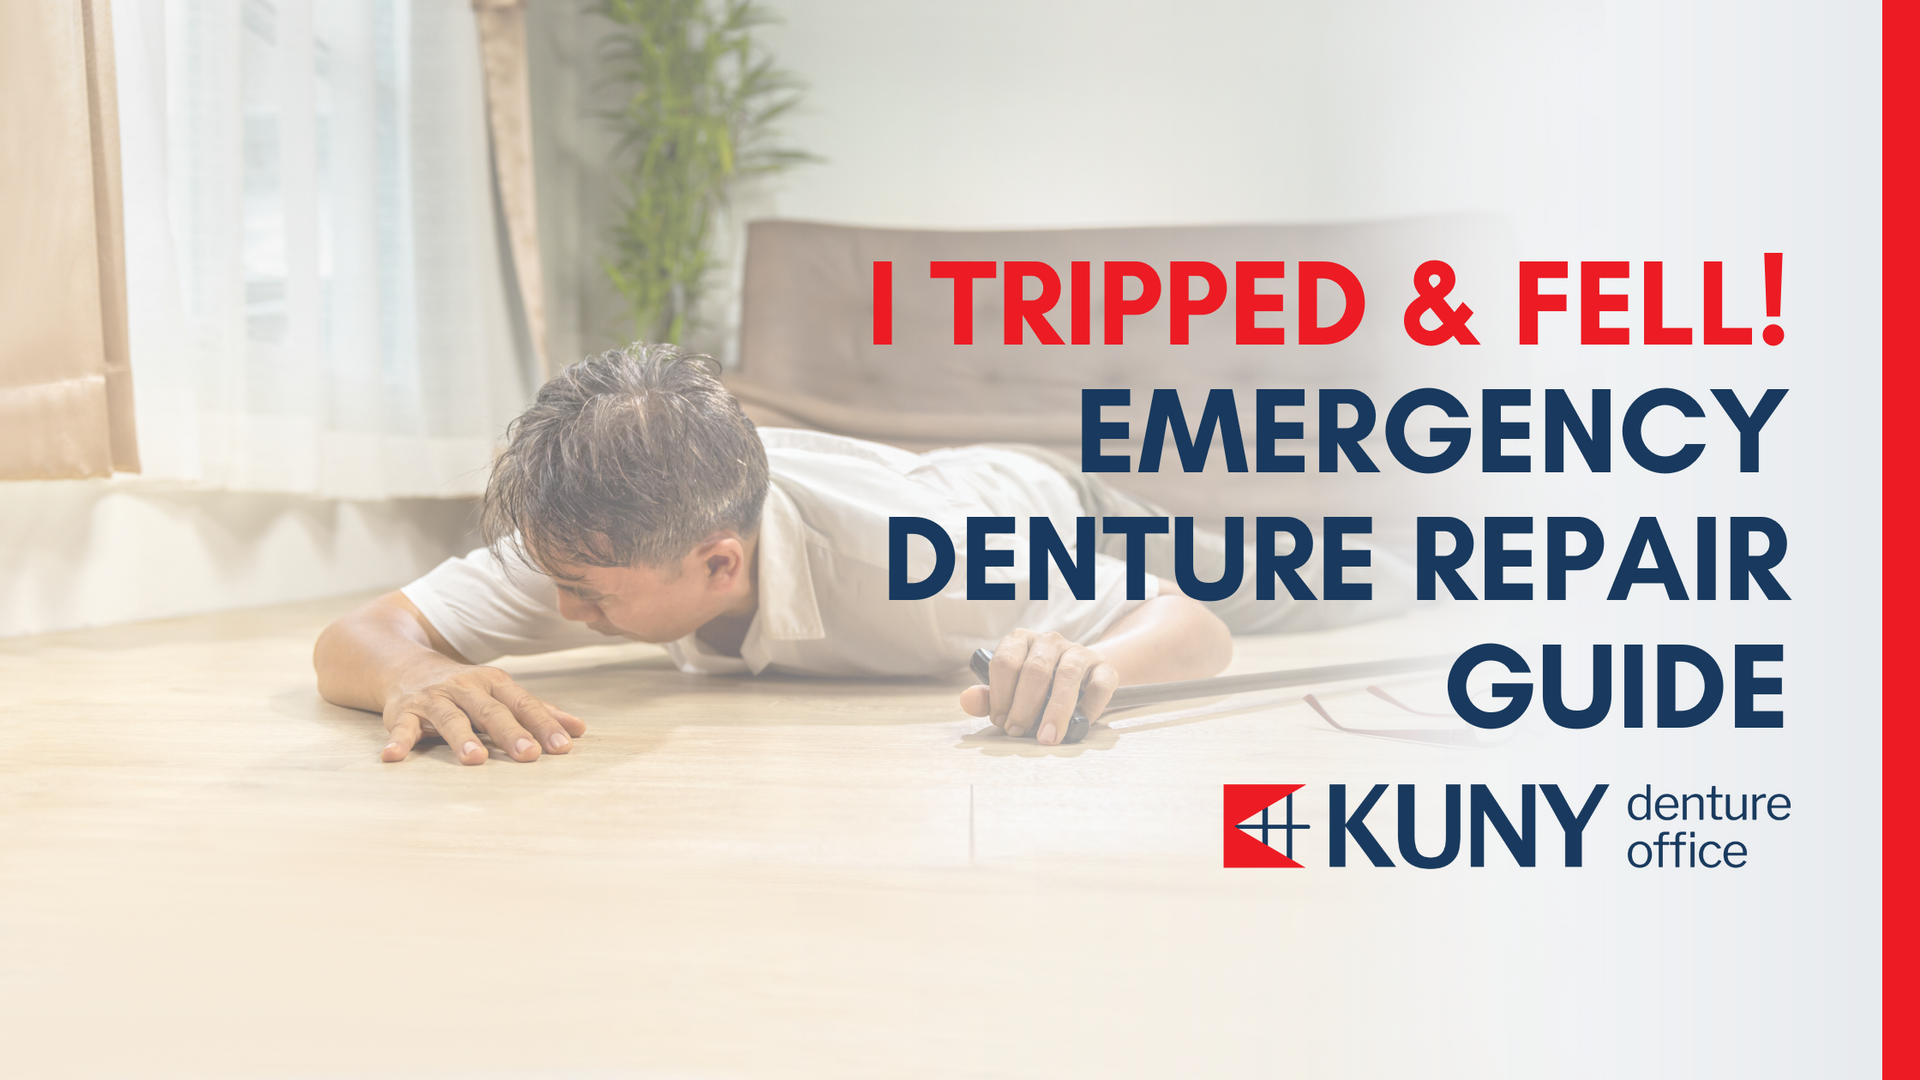 man laying on the ground after fall with title I Tripped & Fell! Emergency Denture Repair Guide